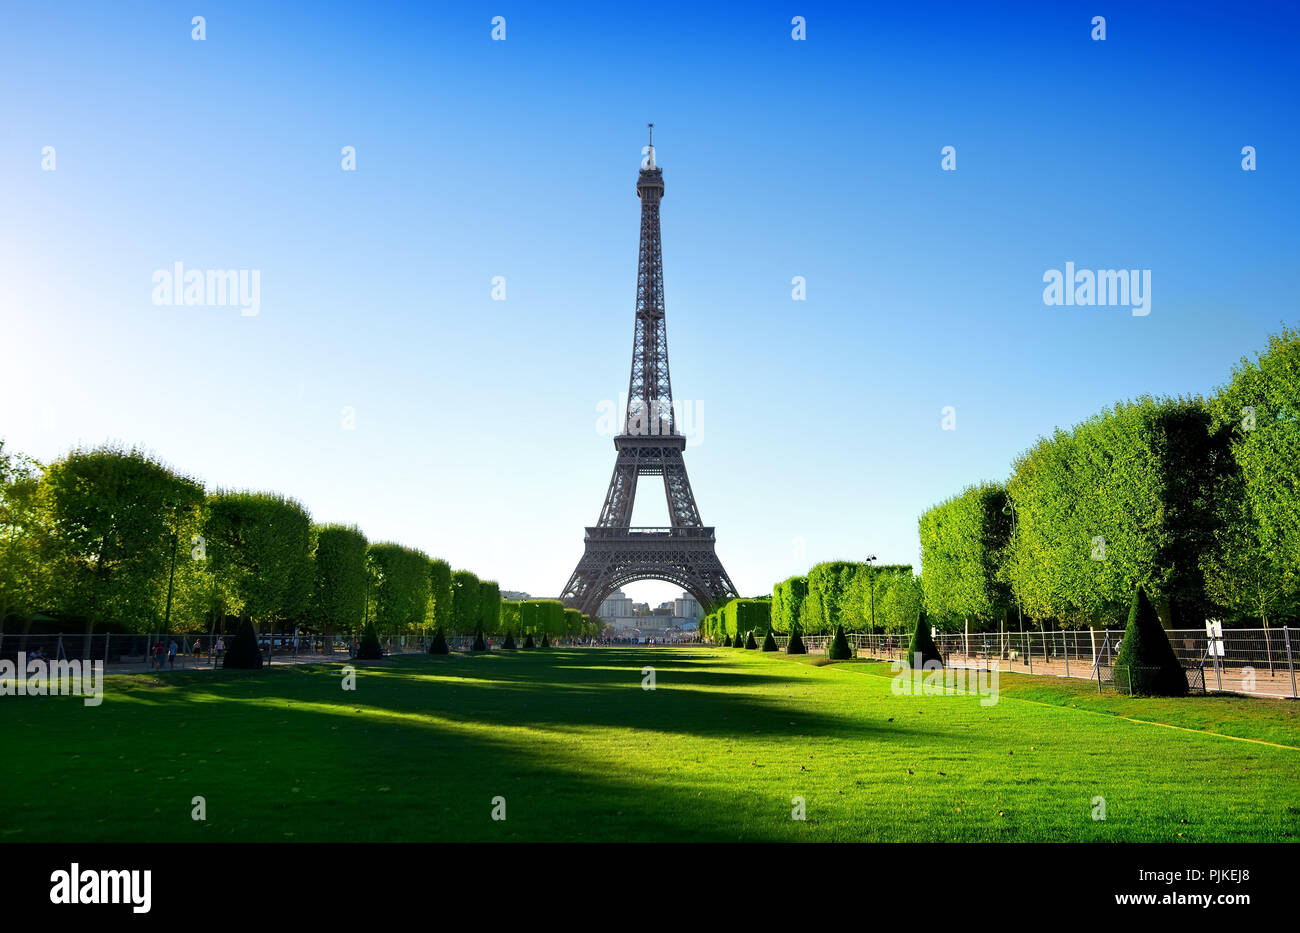 Eiffel Tower view from Champ de Mars in Paris, France Stock Photo